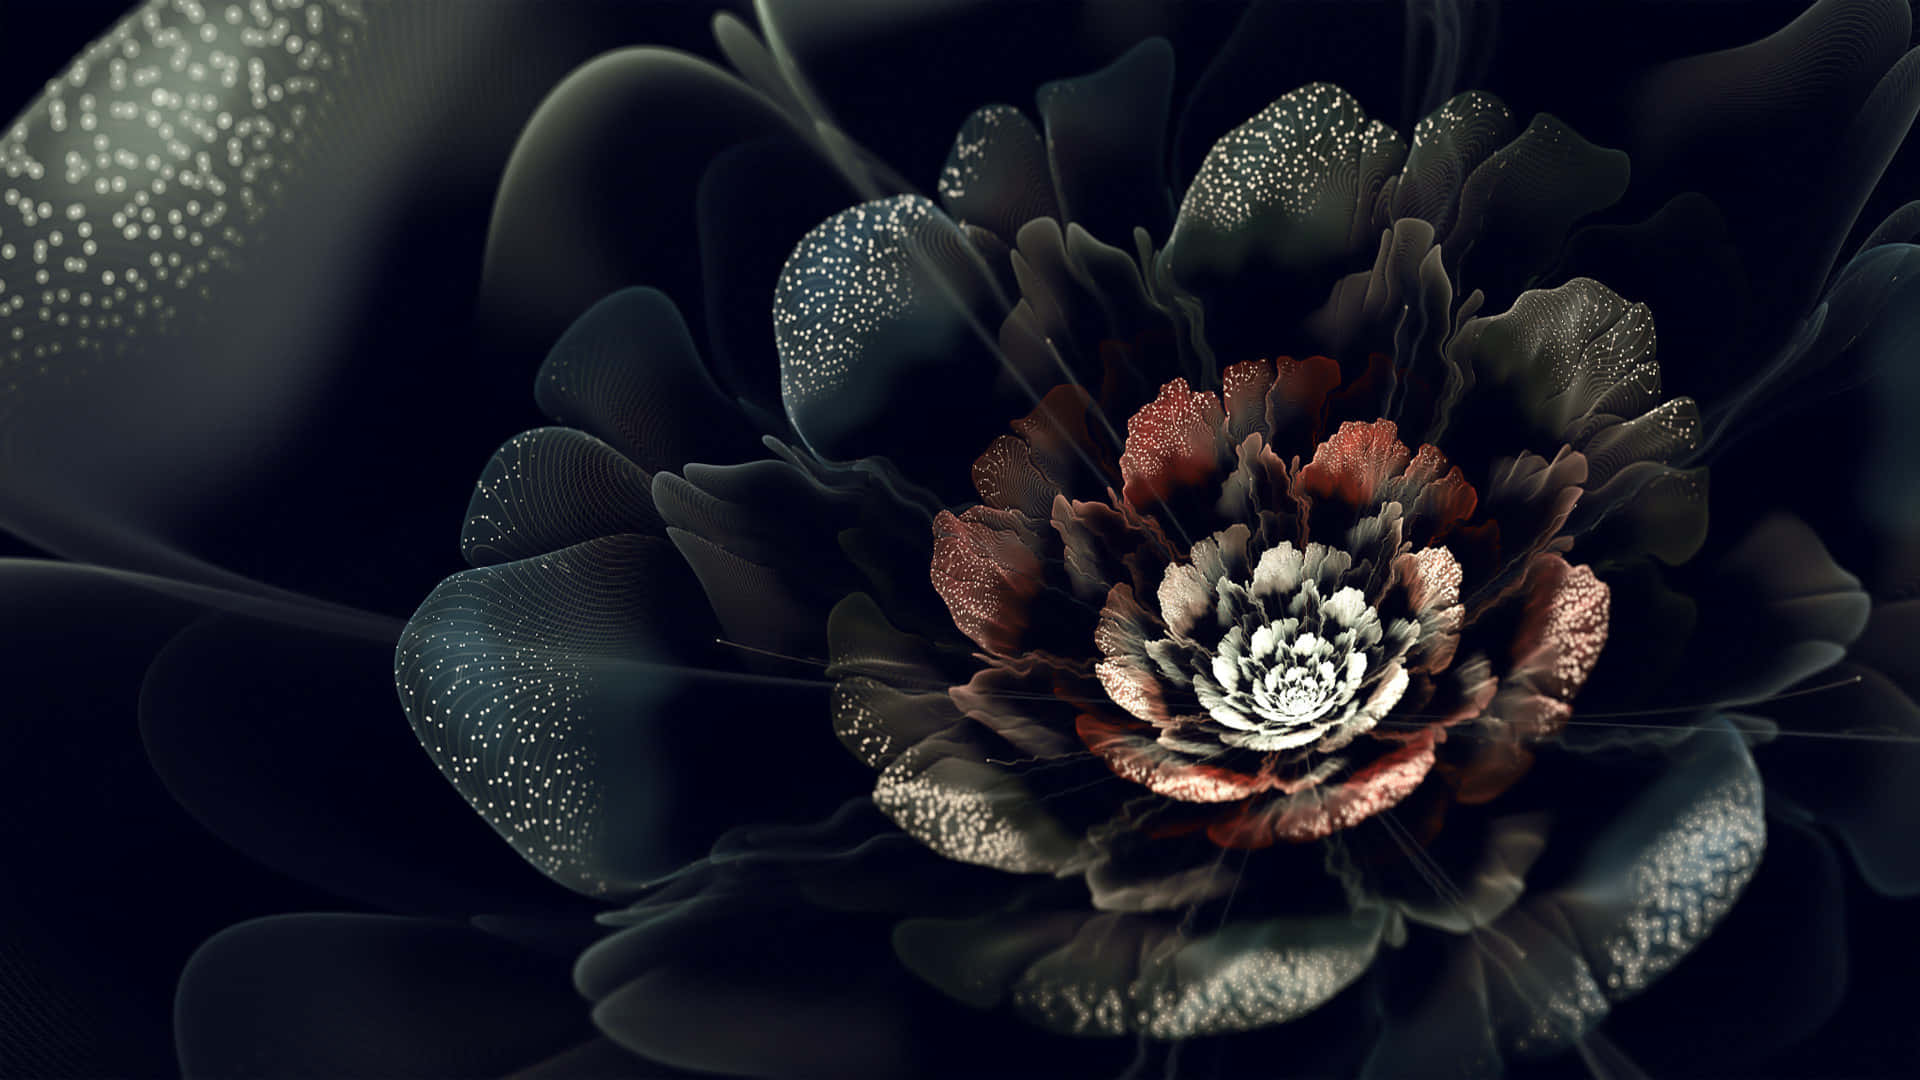 An ethereal black rose blooming with beauty.